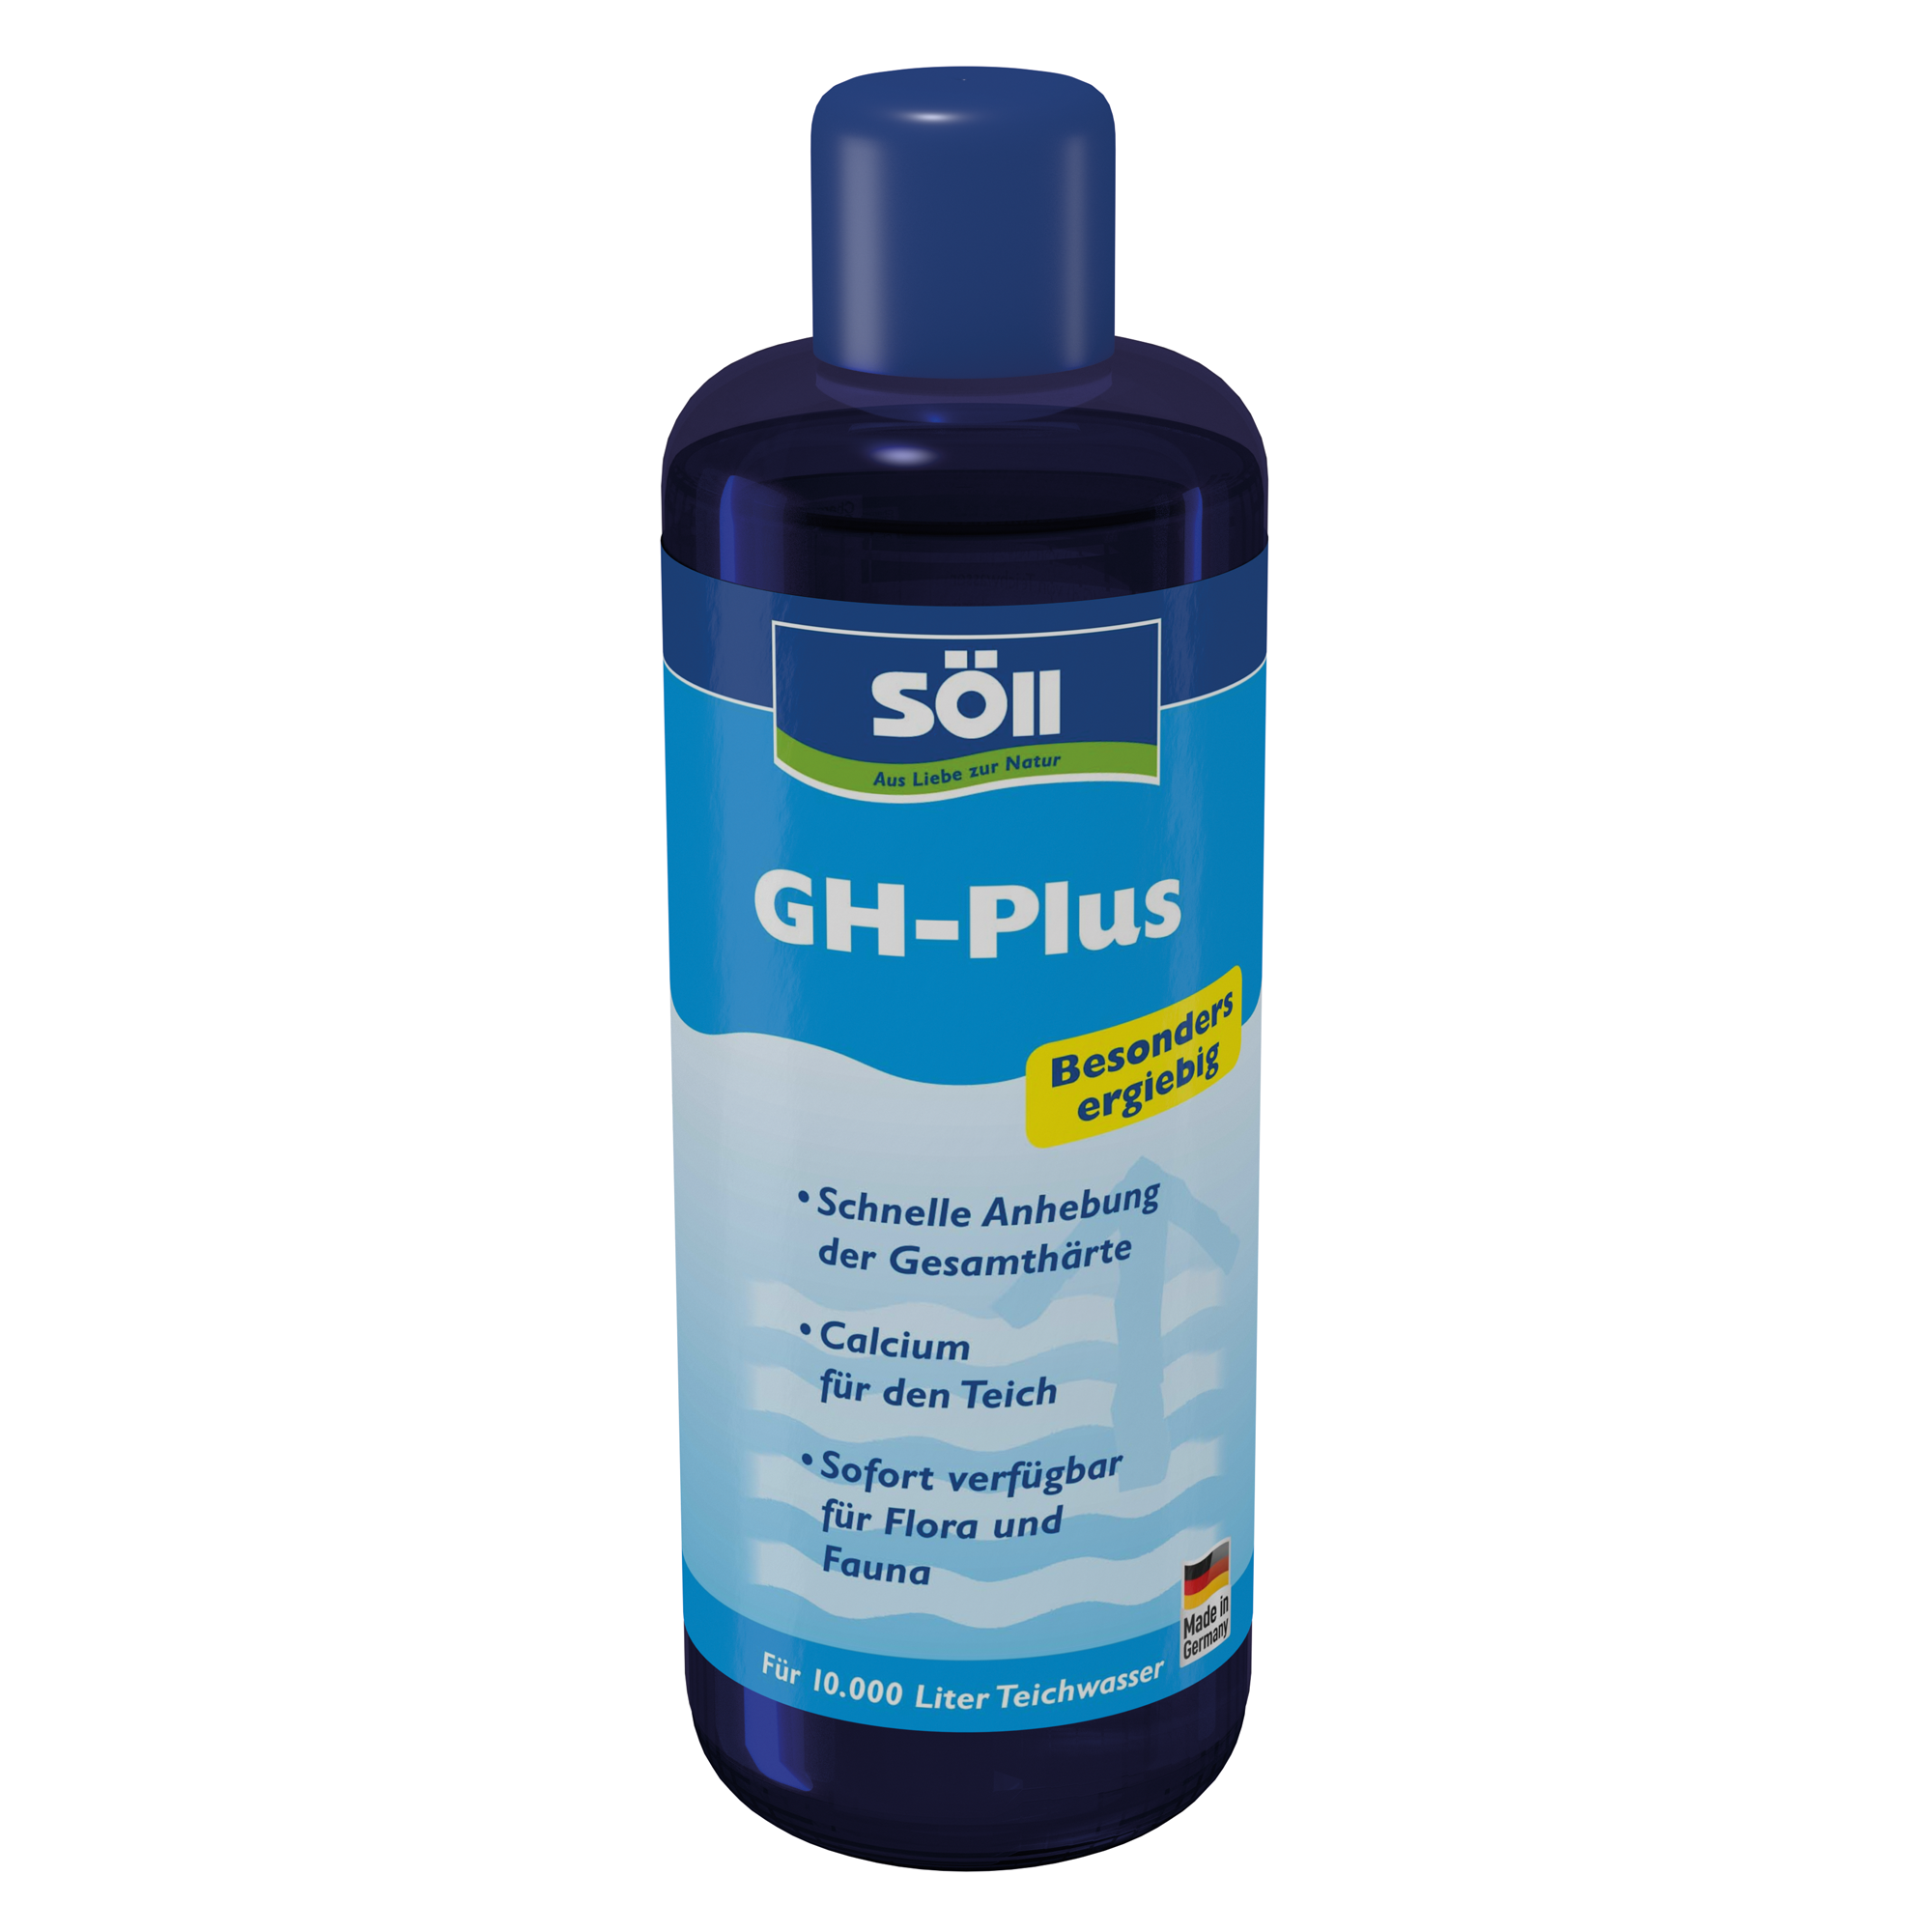 GH-Plus 500 ml + product picture